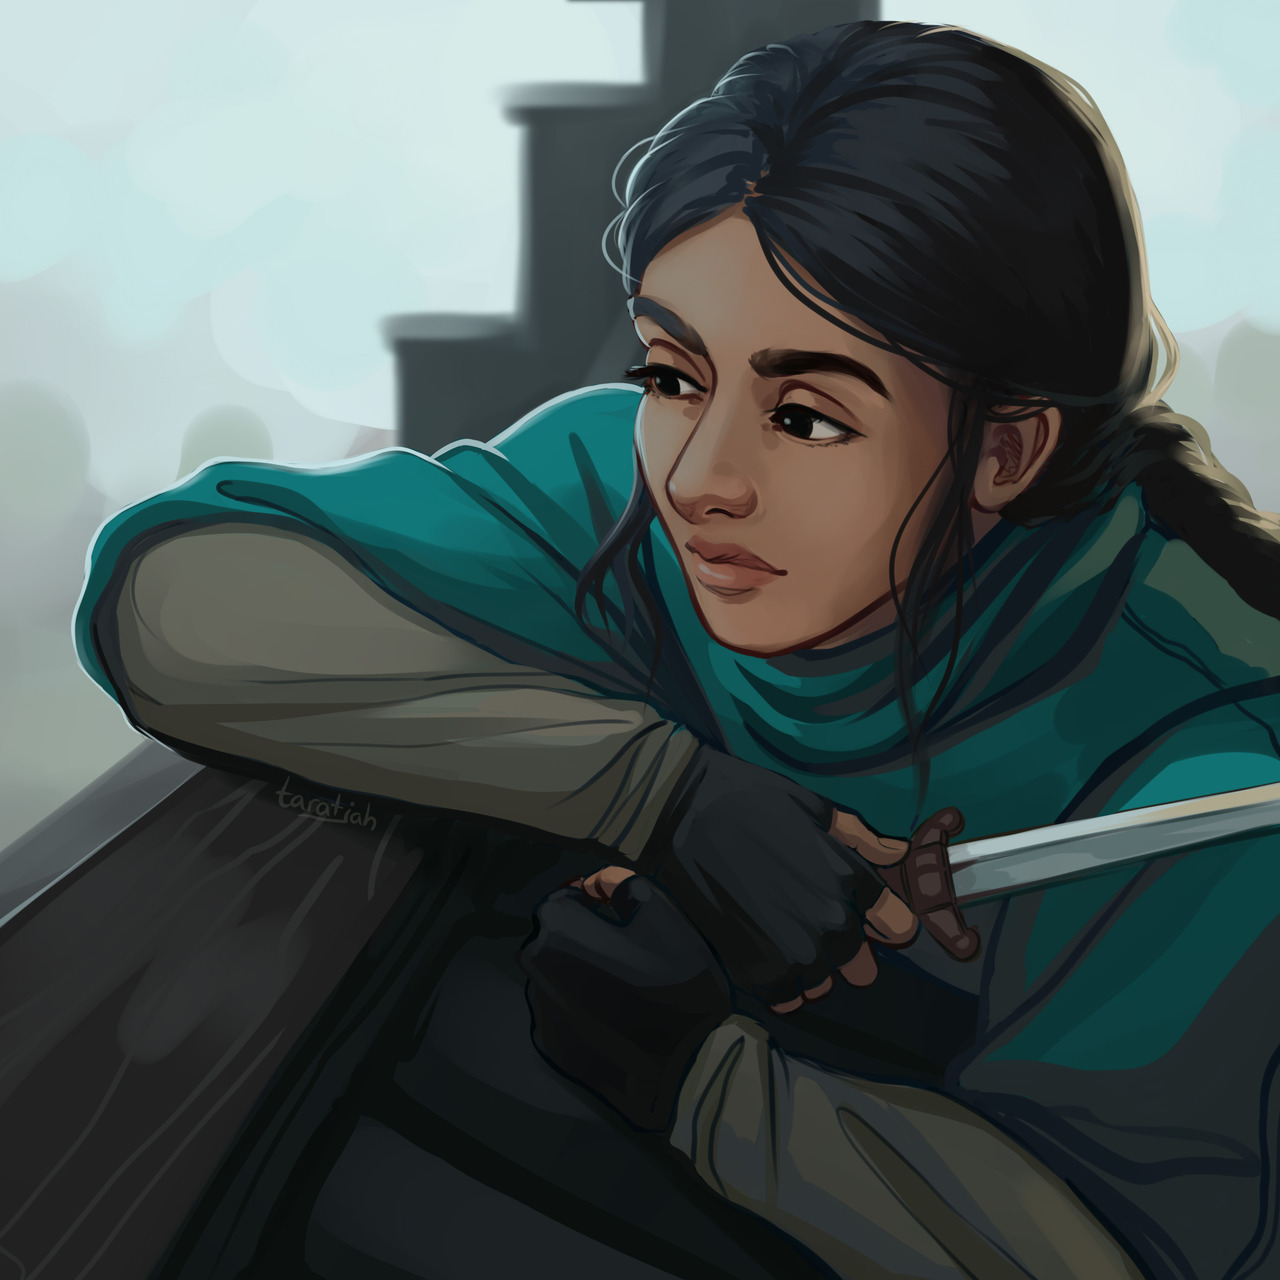 Six of Crows won the fanart poll on my Patreon, so I drew Inej! The new poll will be up in a couple of days :)